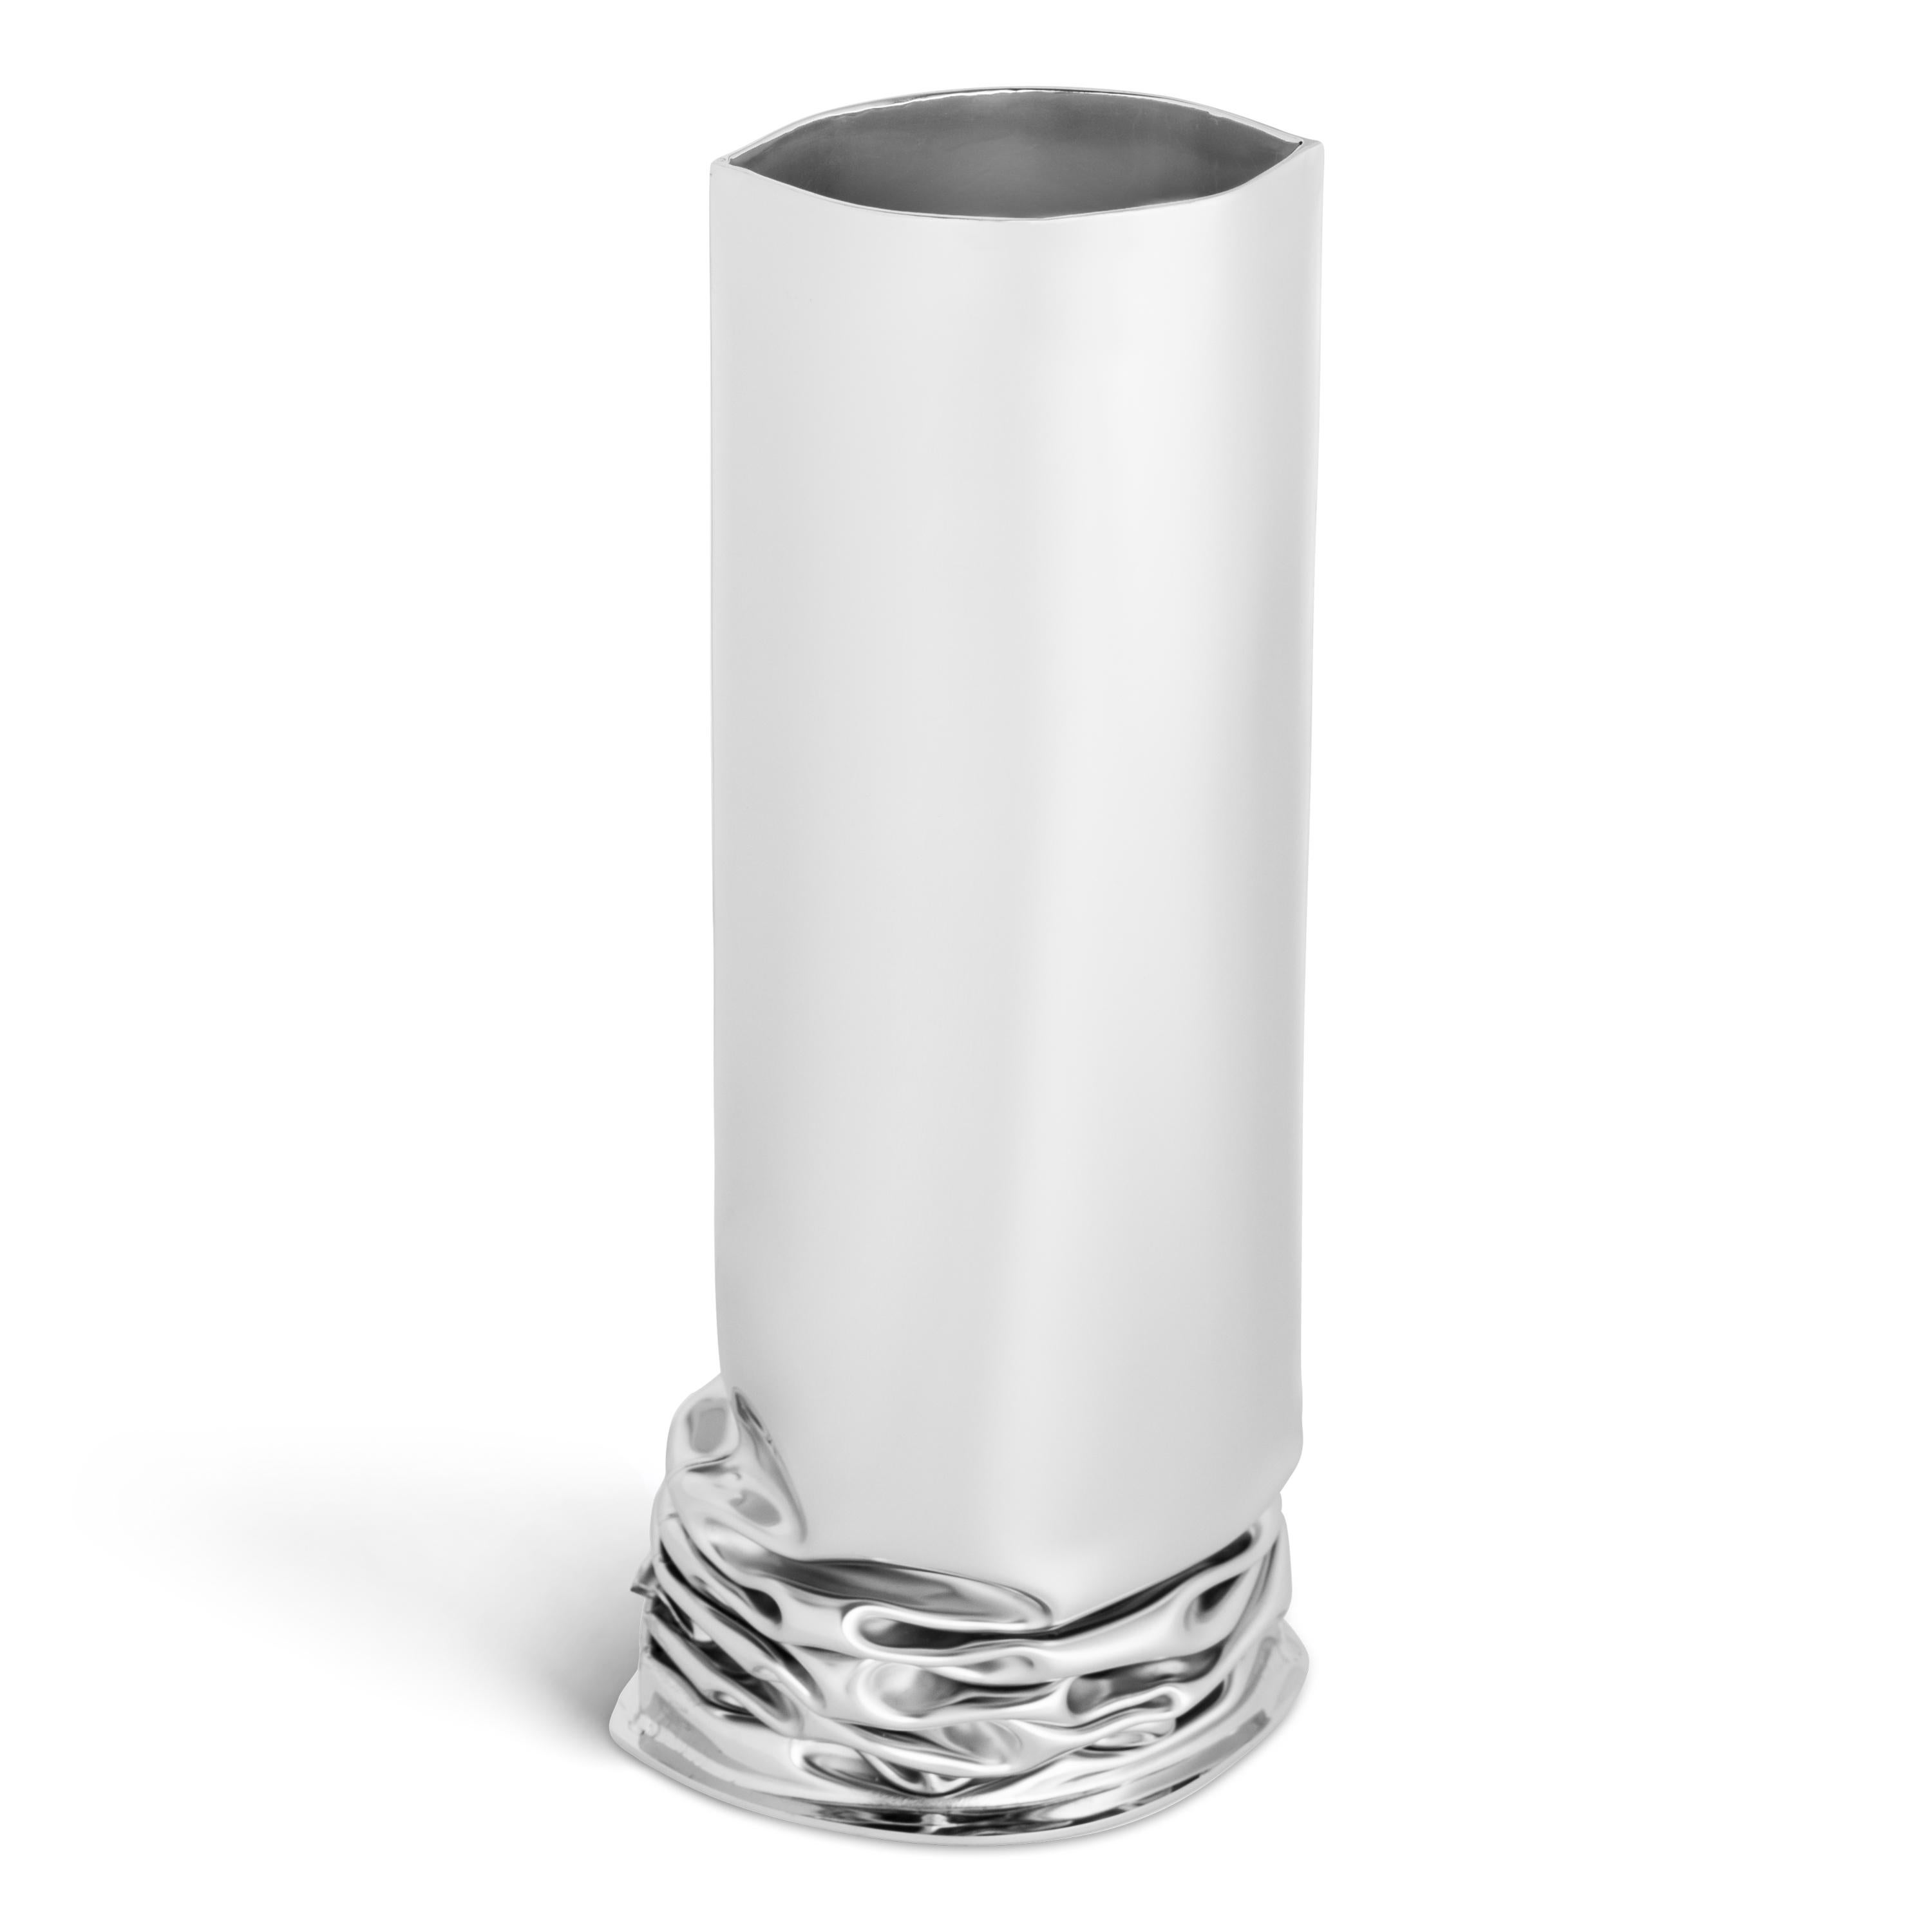 Organic Modern Set of 3 Contemporary Vases 'Crash' by Zieta, Stainless Steel For Sale